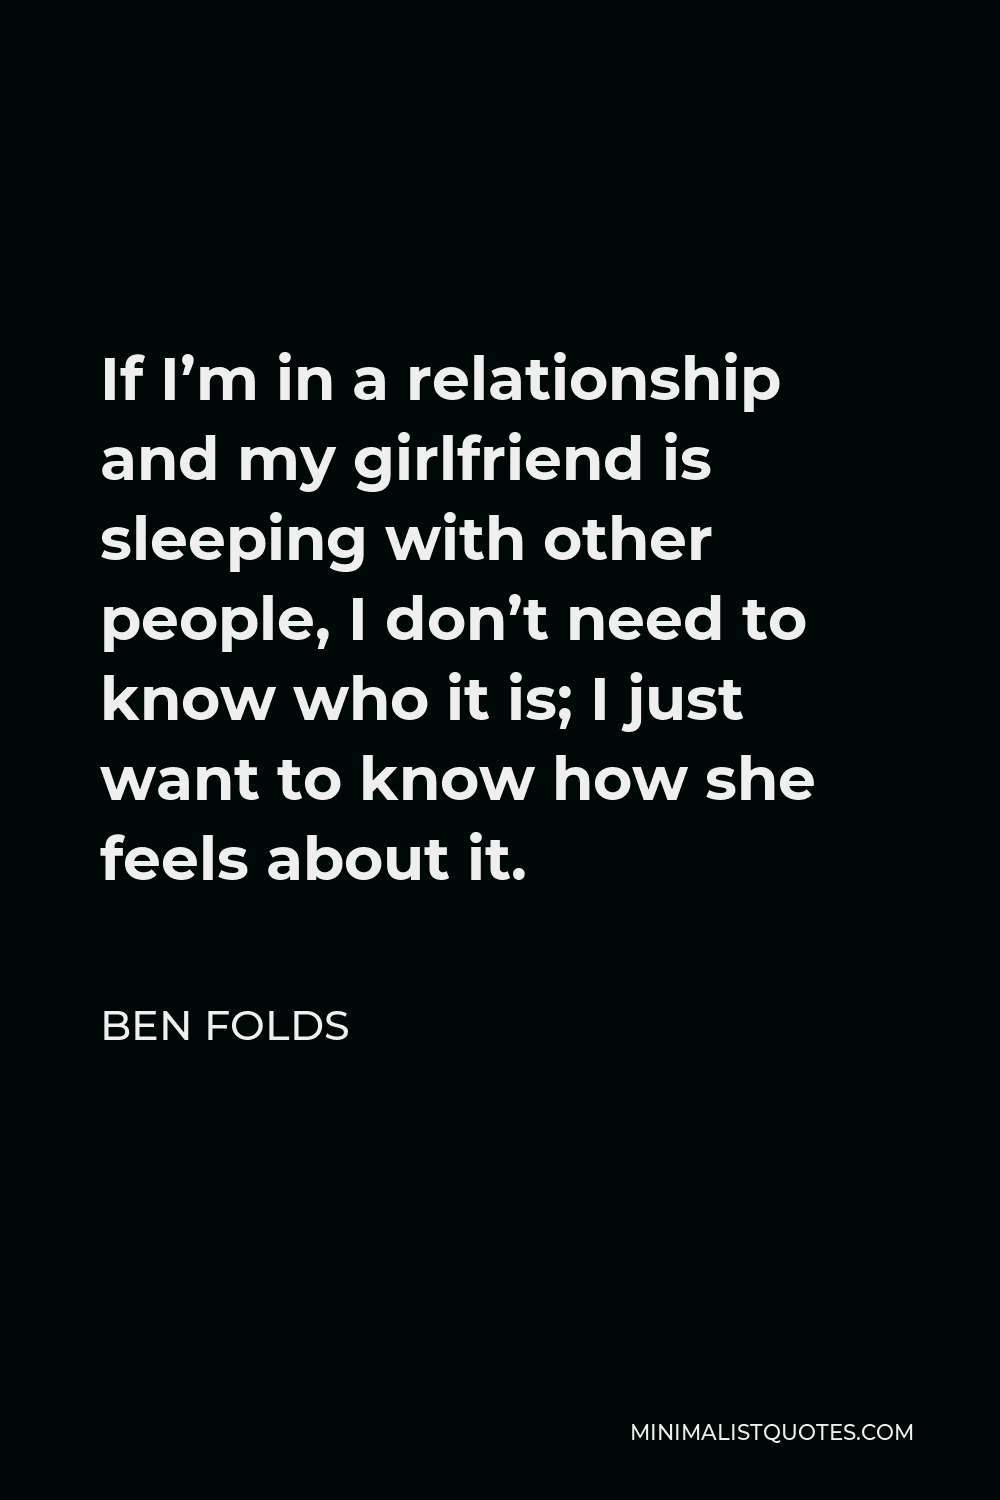 Ben Folds Quote - If I’m in a relationship and my girlfriend is sleeping with other people, I don’t need to know who it is; I just want to know how she feels about it.